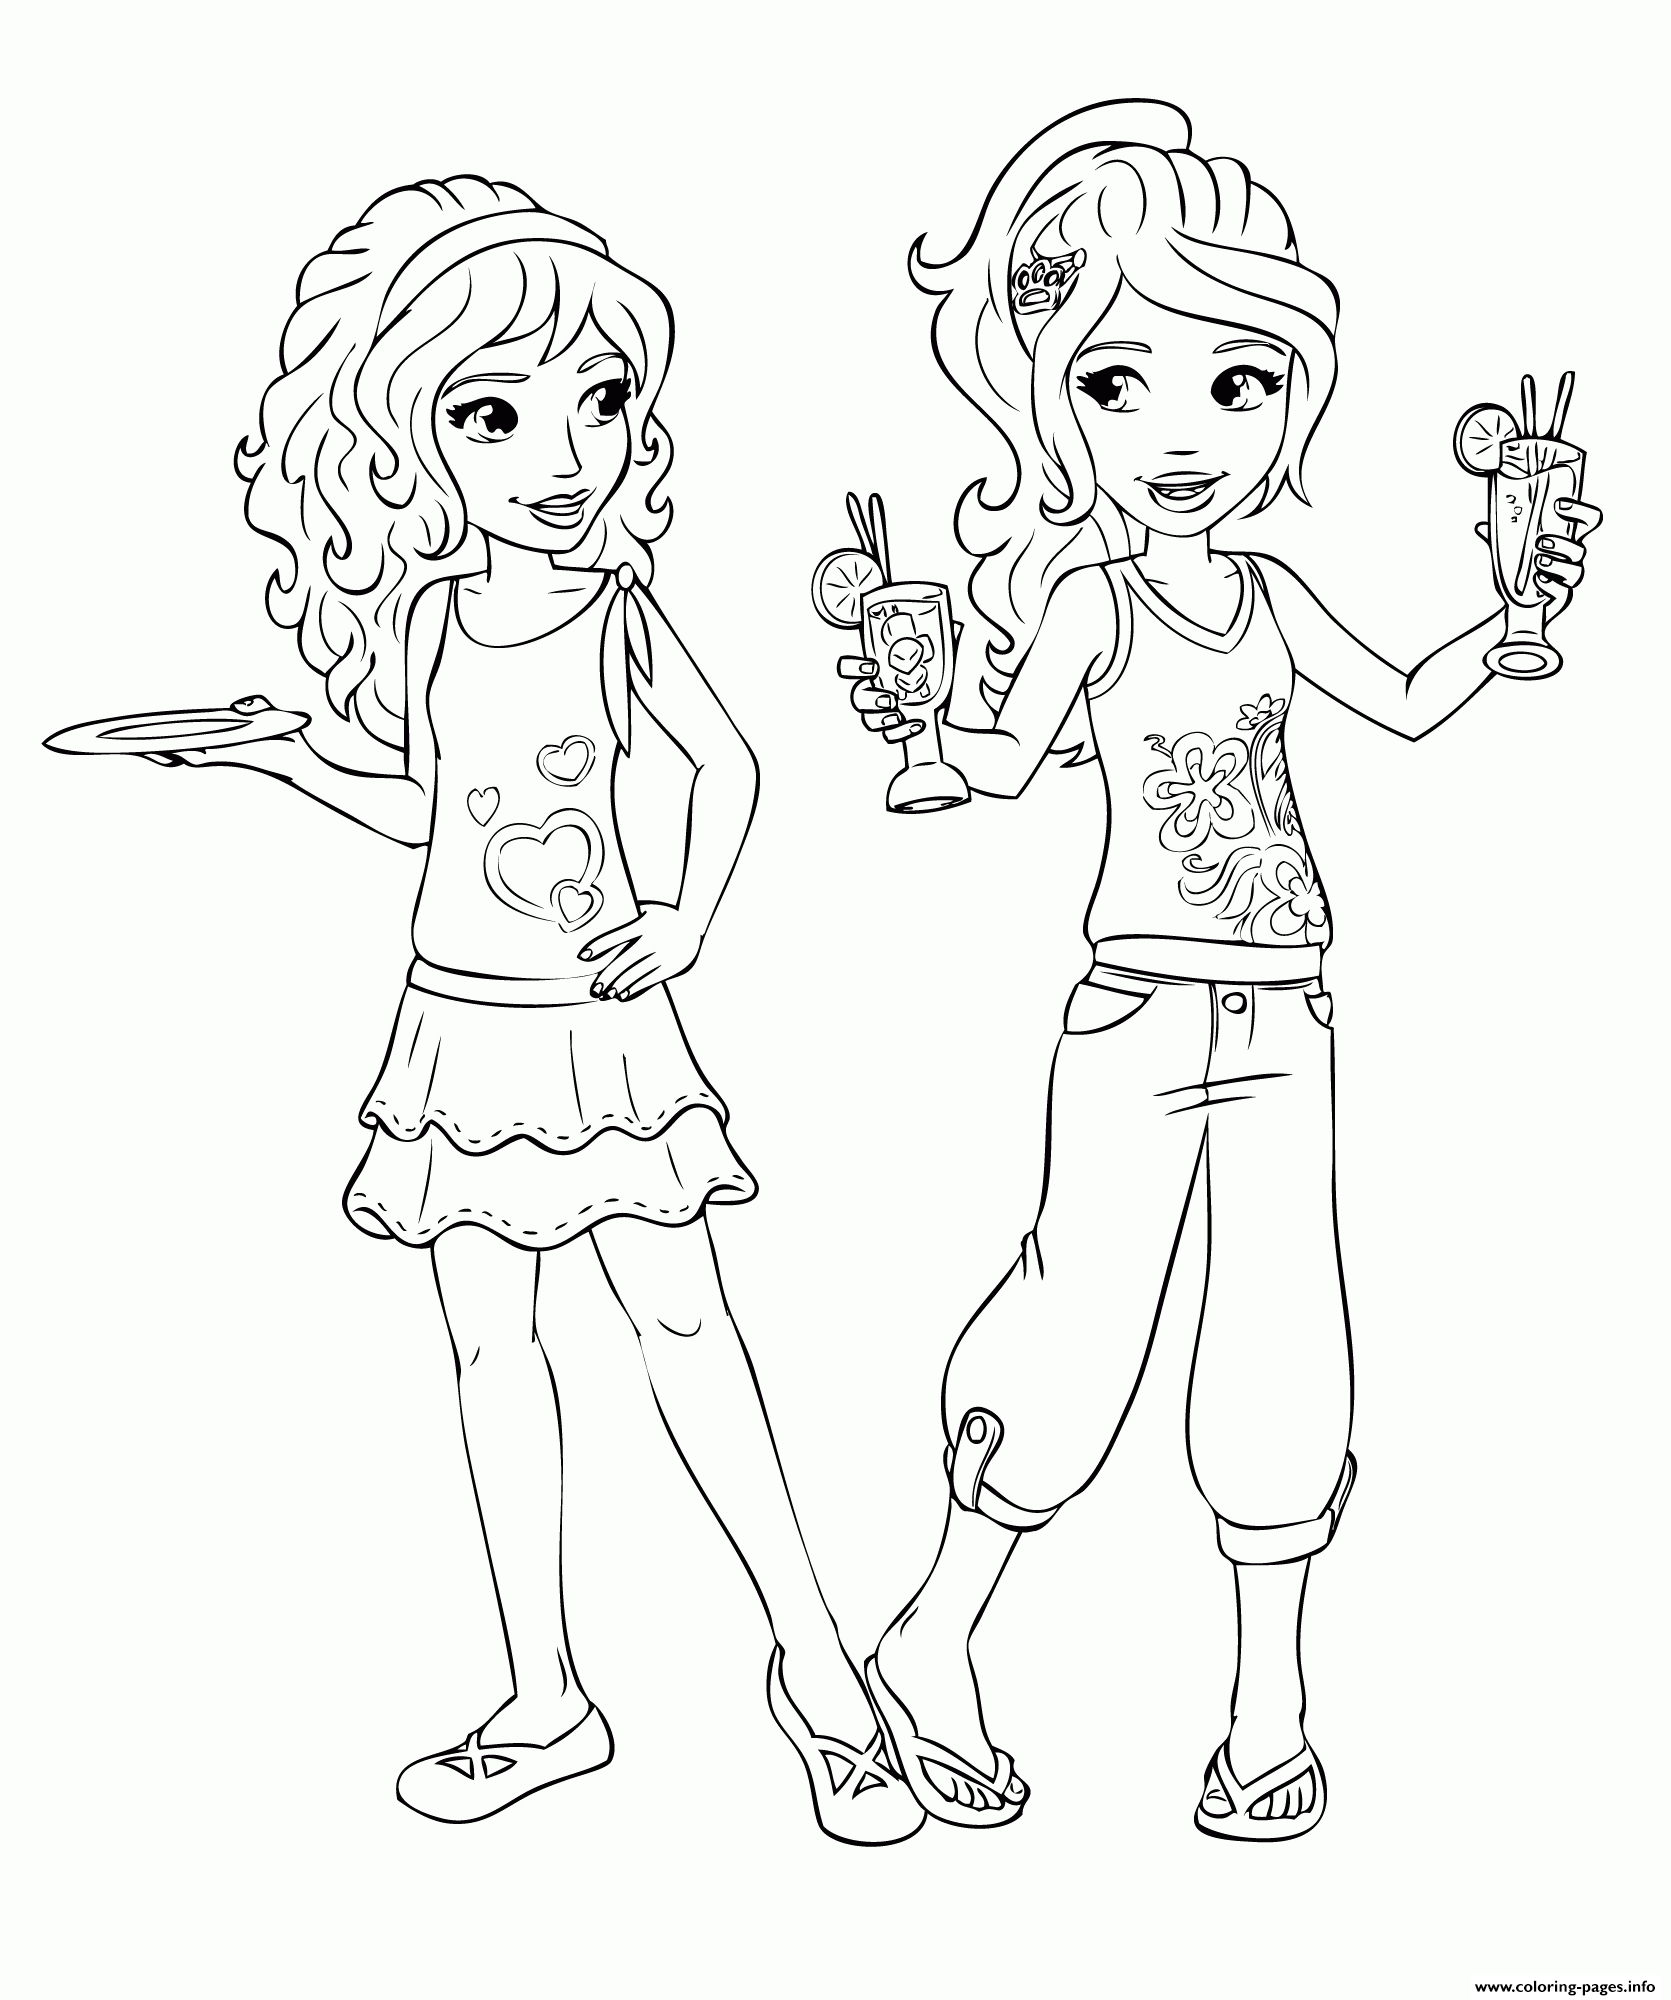 Lego Friends Printable Coloring Pages Lego Friends Mia Drinks Coloring Pages Printable